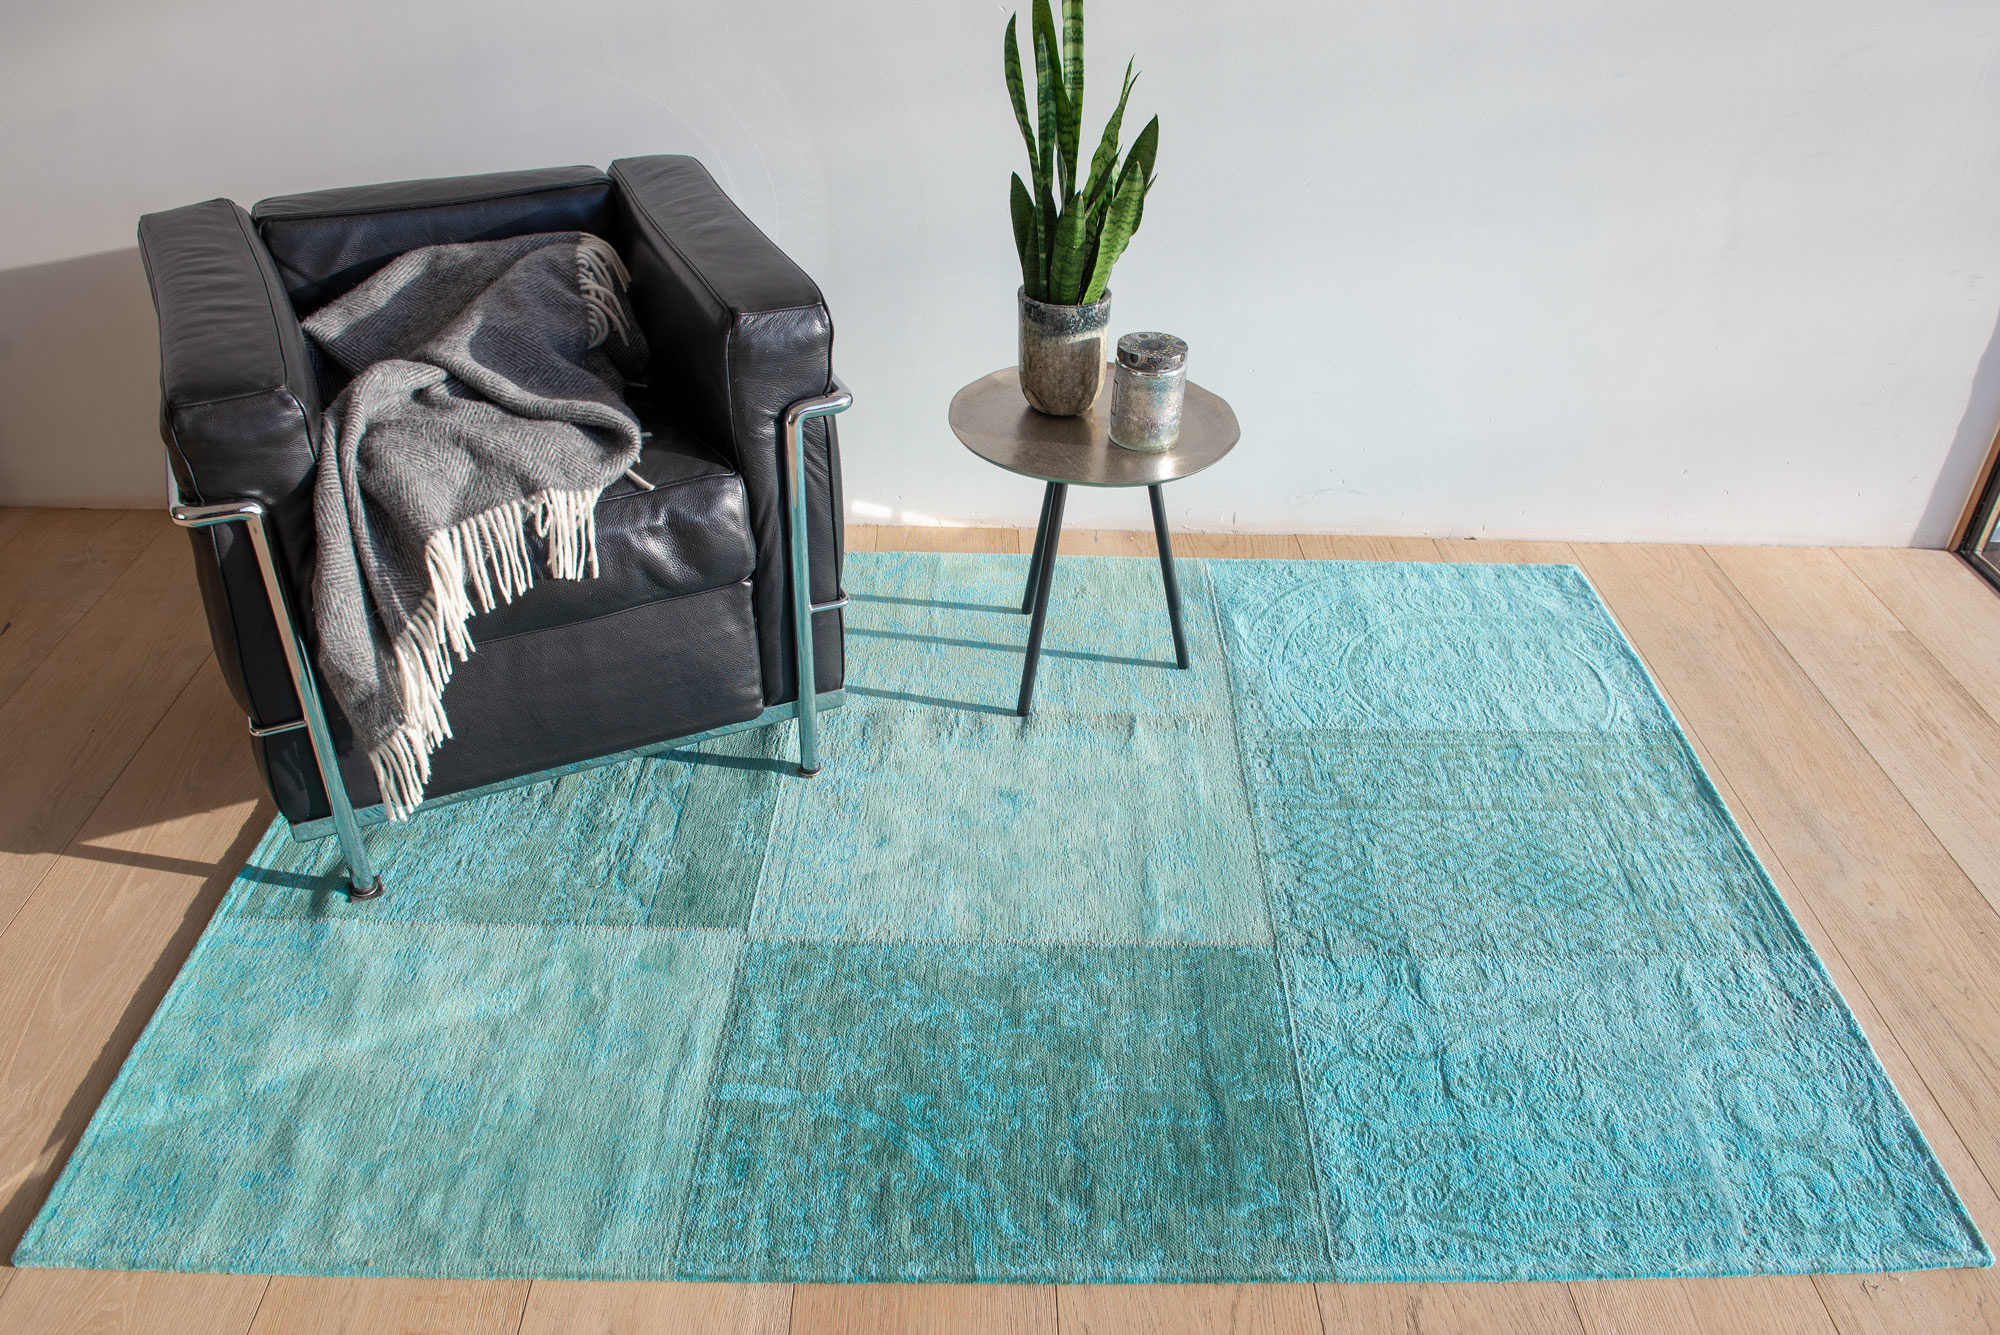 Patchwork Turquoise Rug ☞ Size: 7' 7" x 11' (230 x 330 cm)